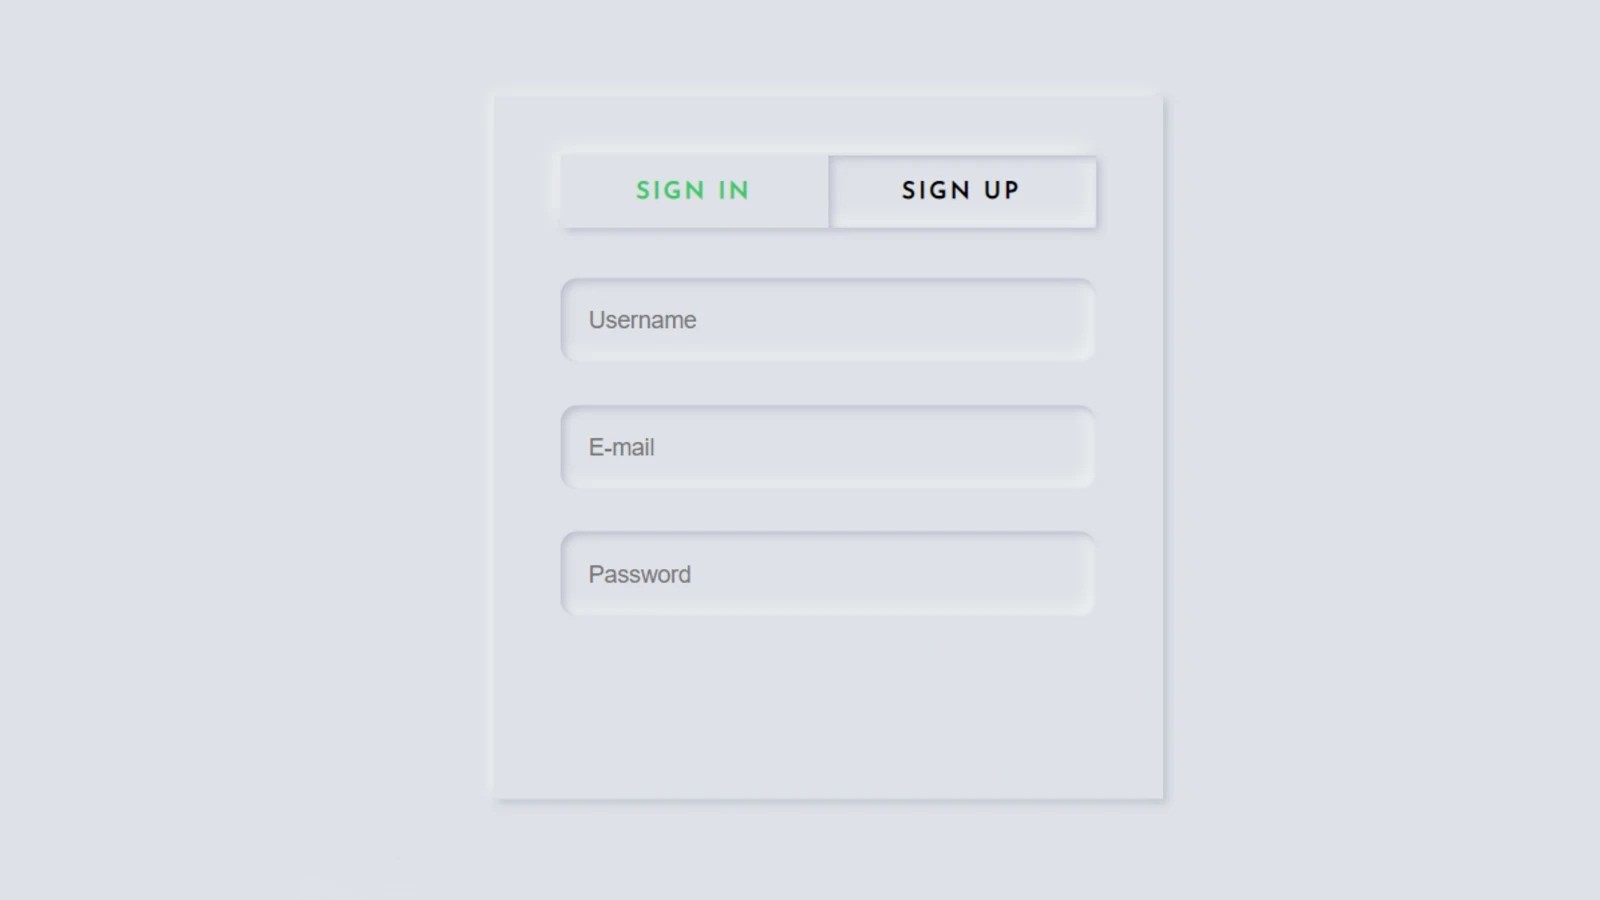 Create a place to input usernames, emails, passwords